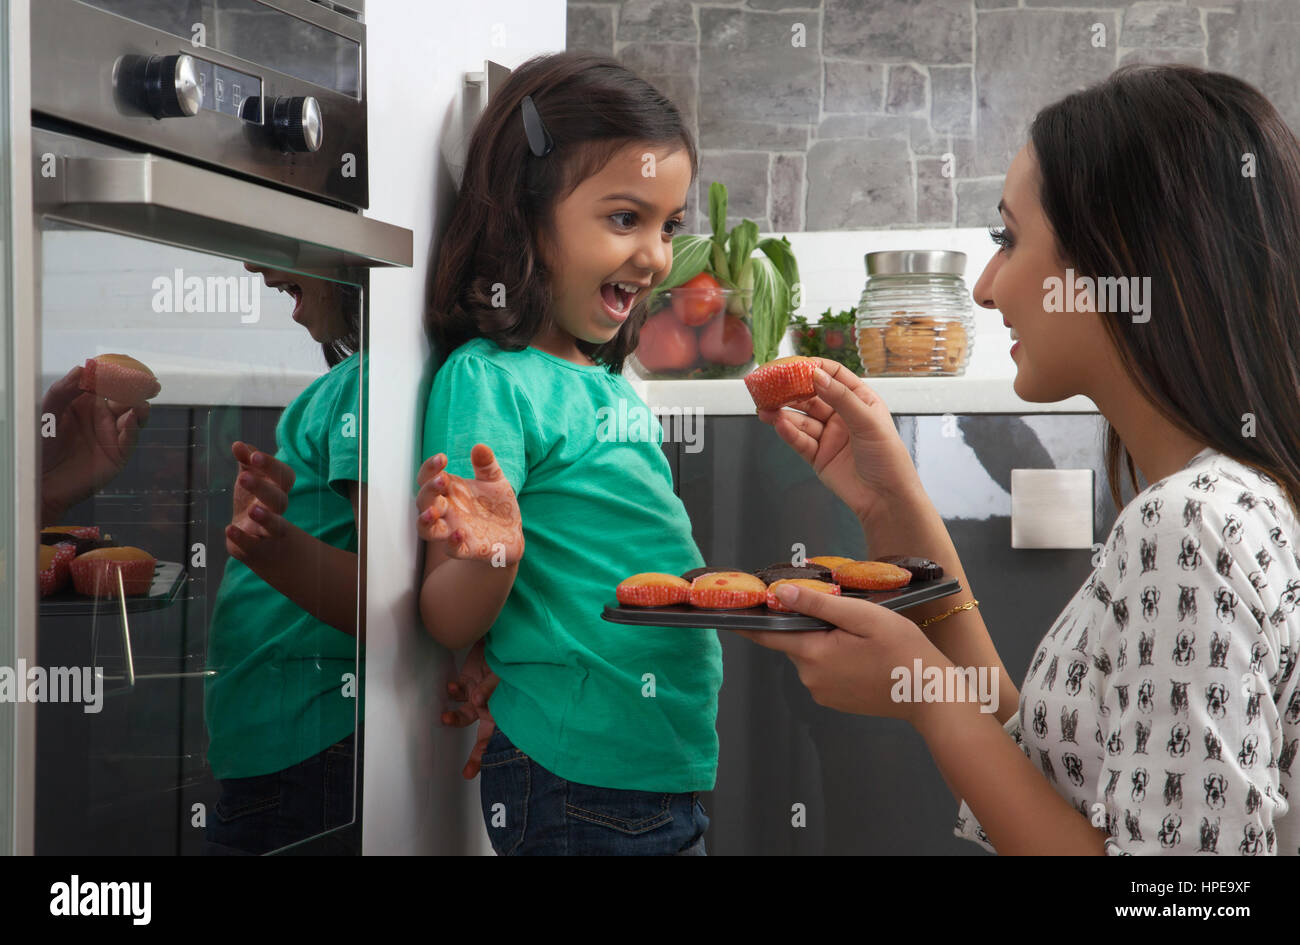 Waitress serving birthday cake to mother and daughter - Stock Image -  F033/5627 - Science Photo Library